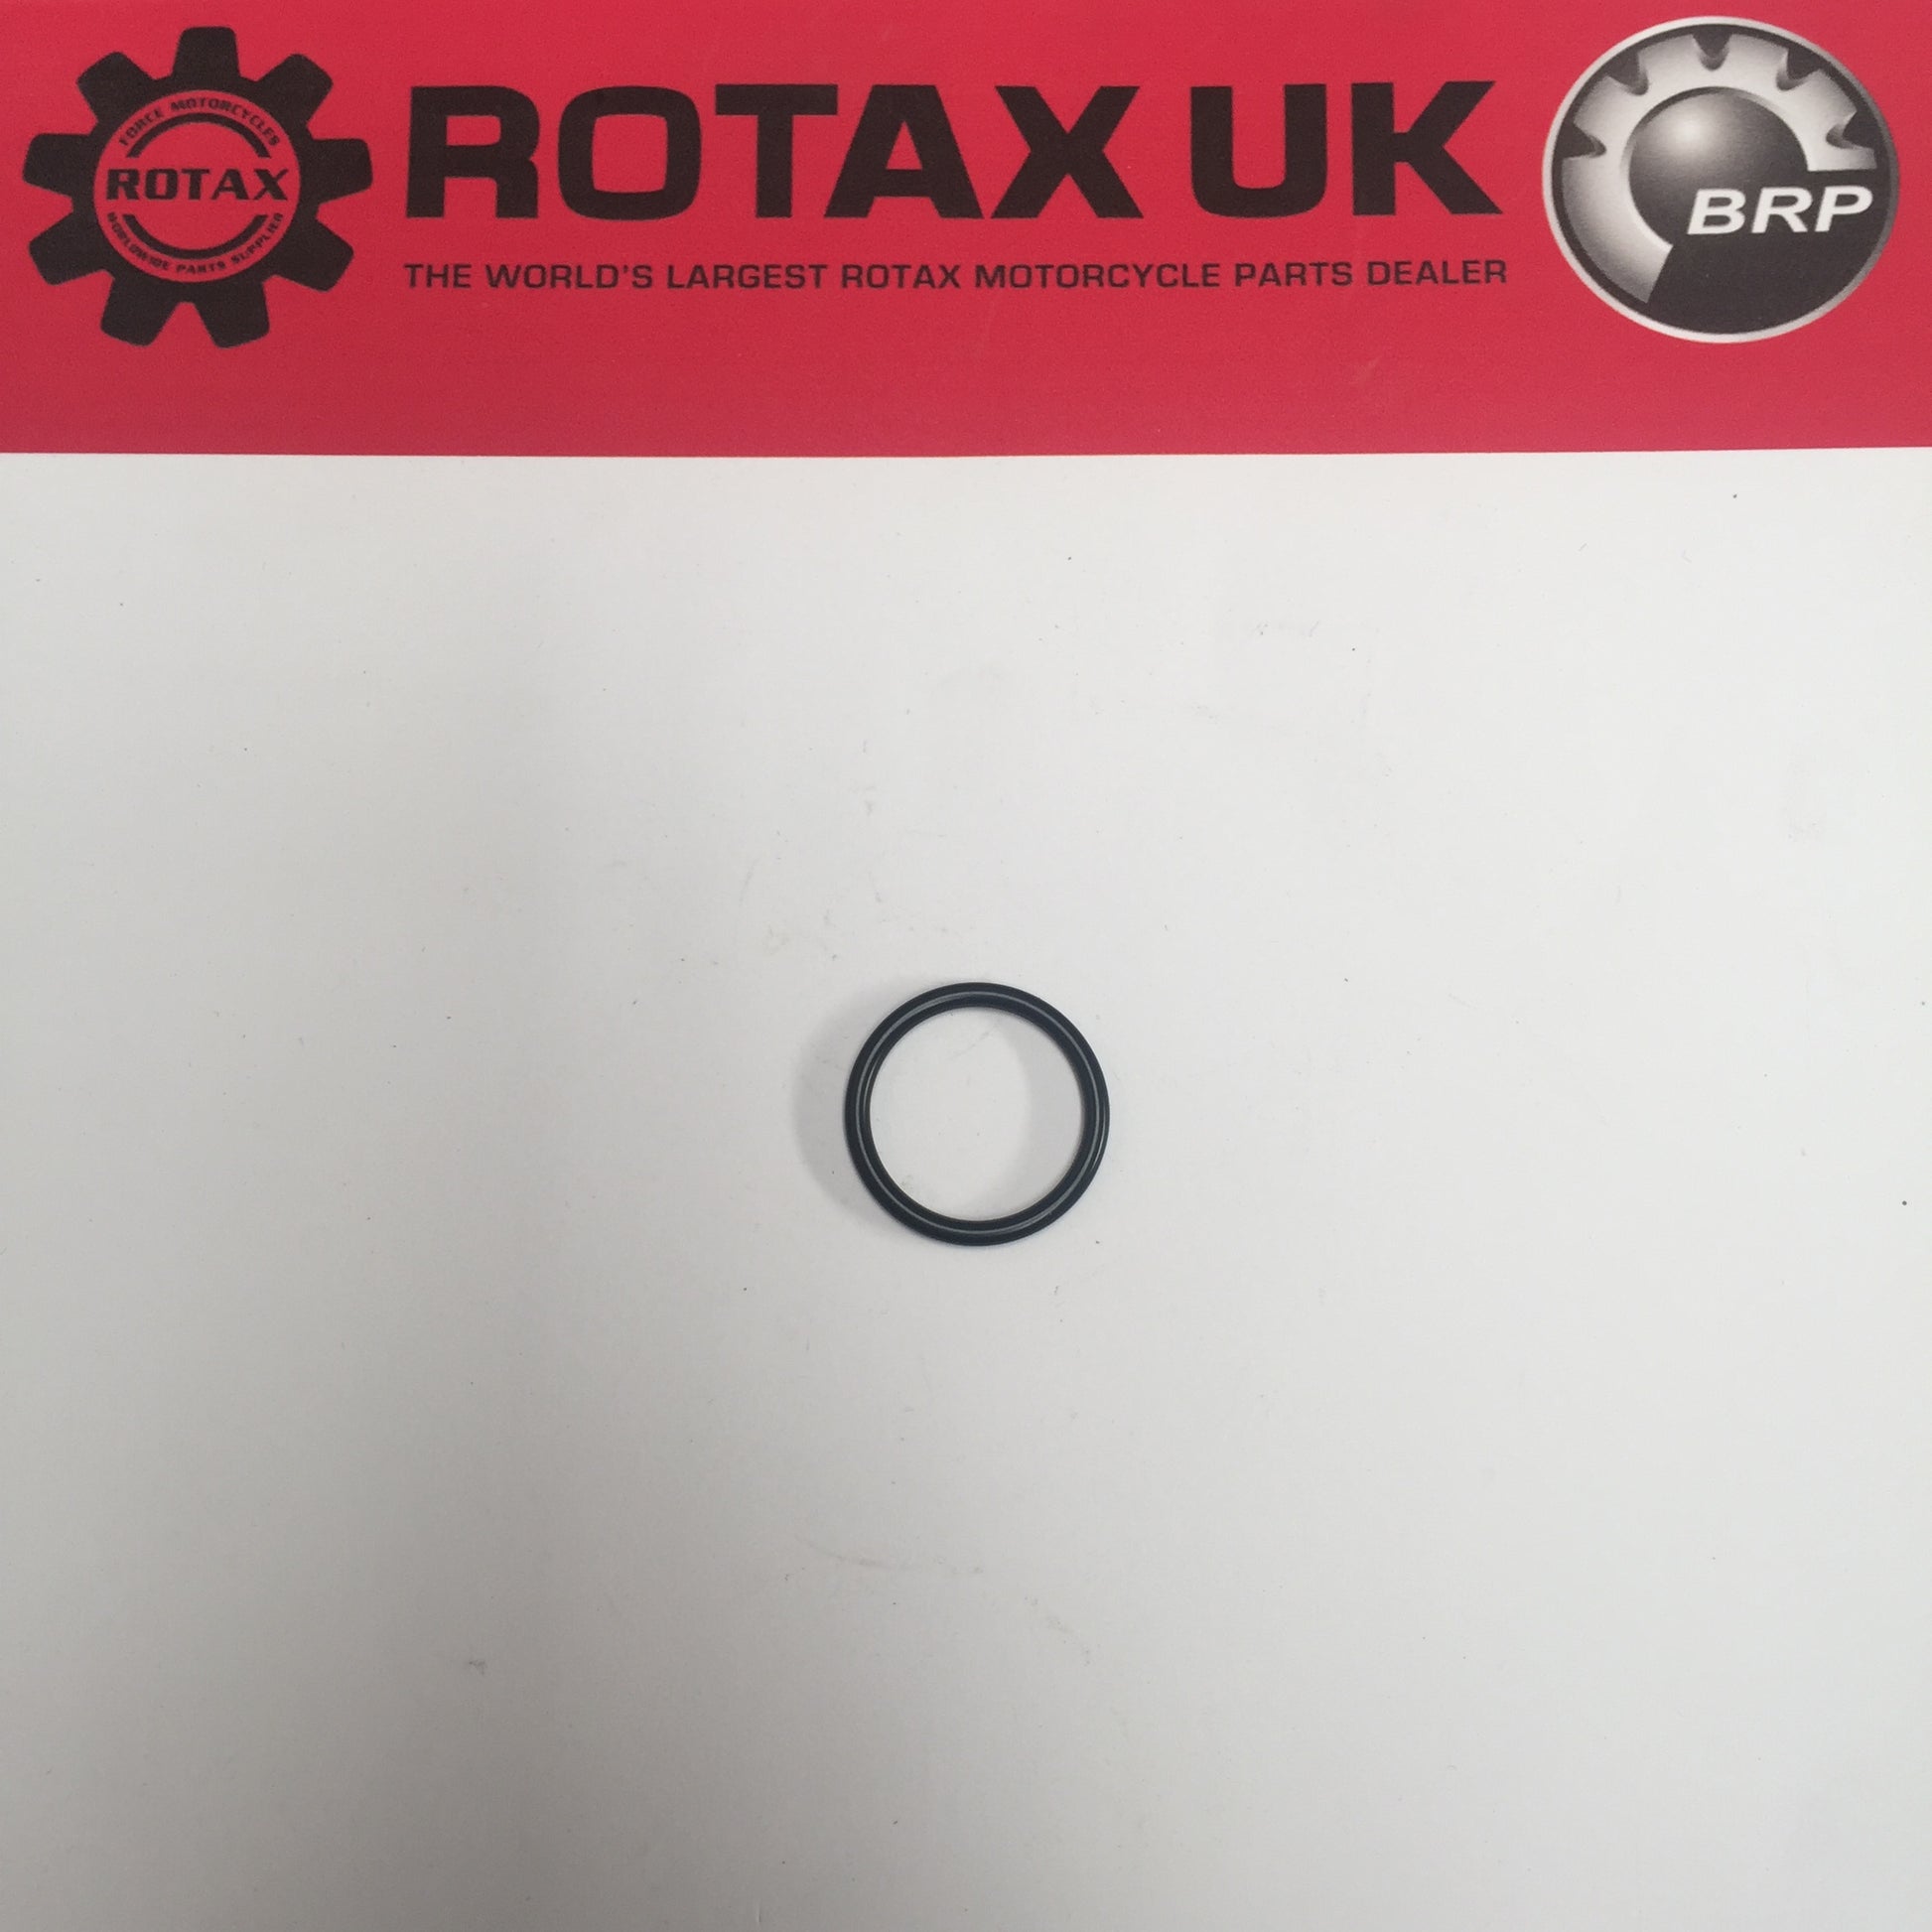 430370 - O Ring 20.3x3.4mm for engine types: 128, 129, 256, 258, 779, 809.